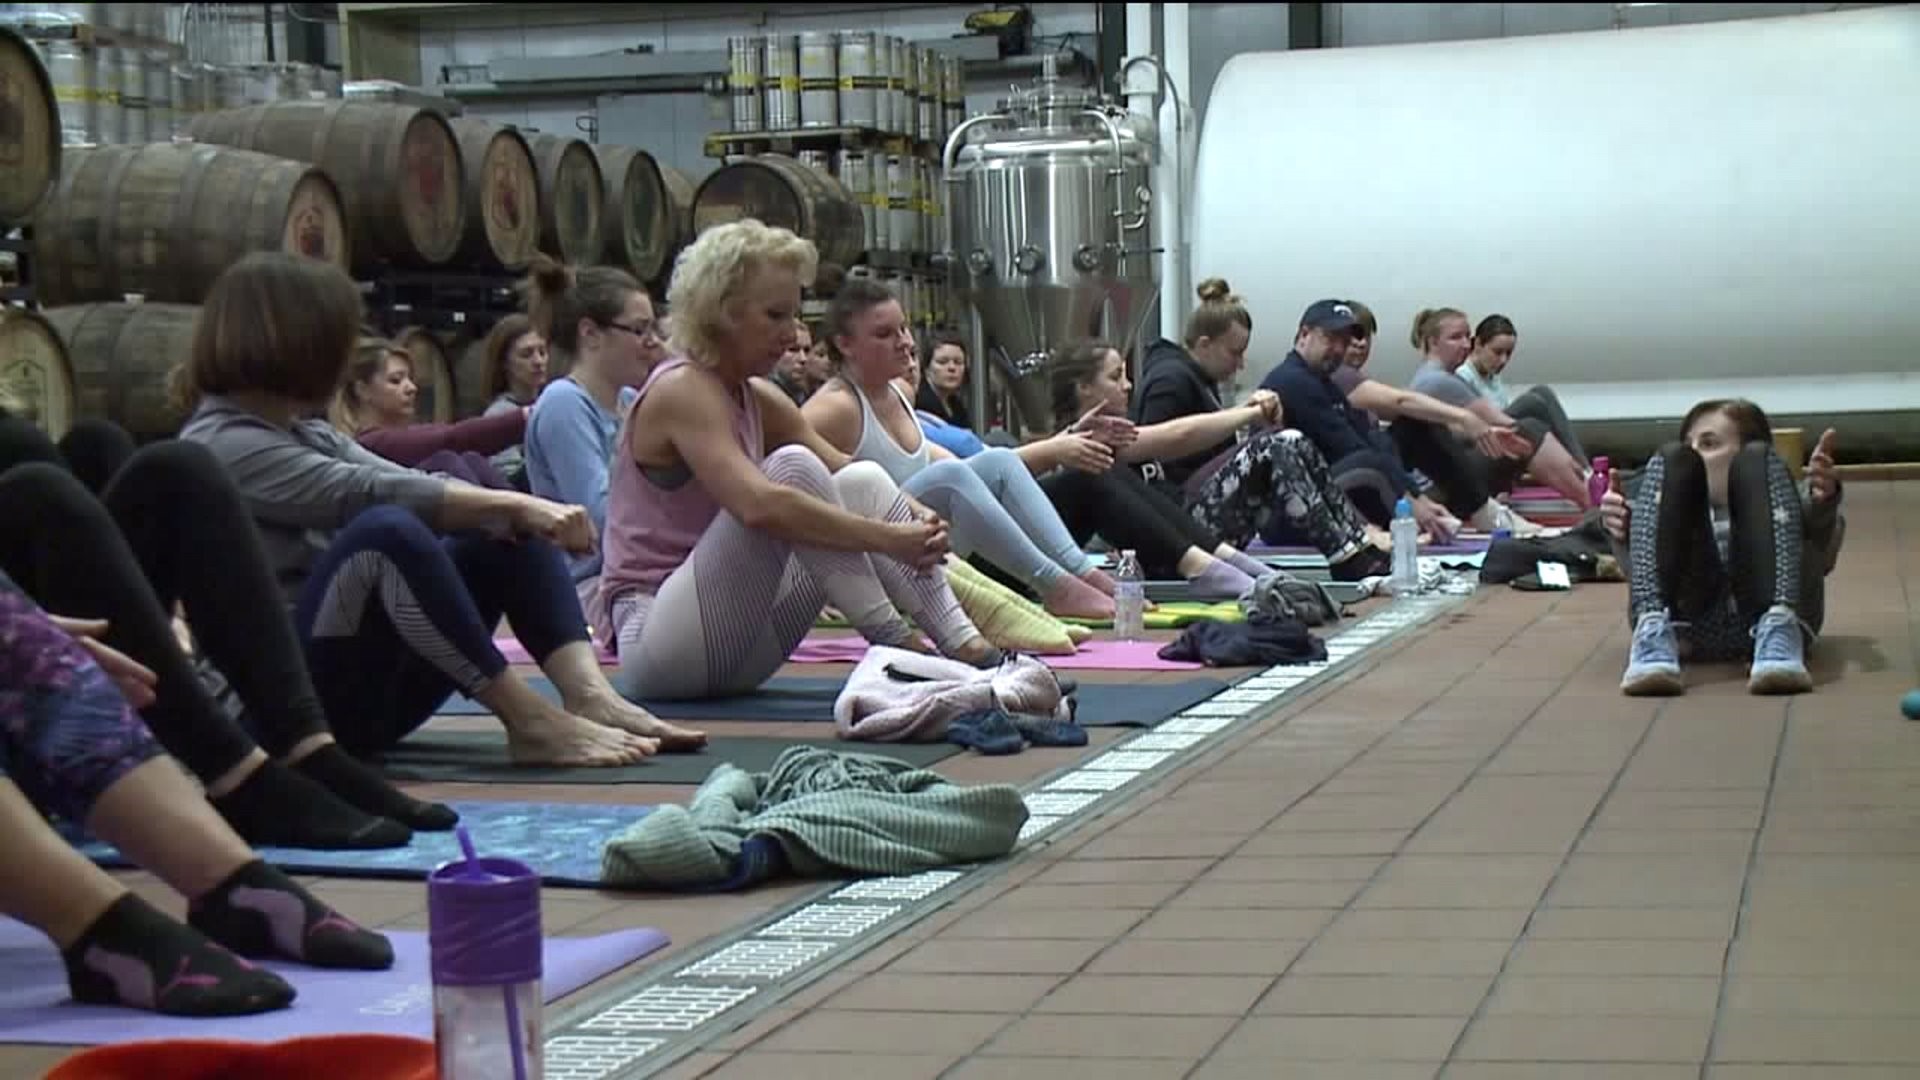 Pairing Yoga and Beer